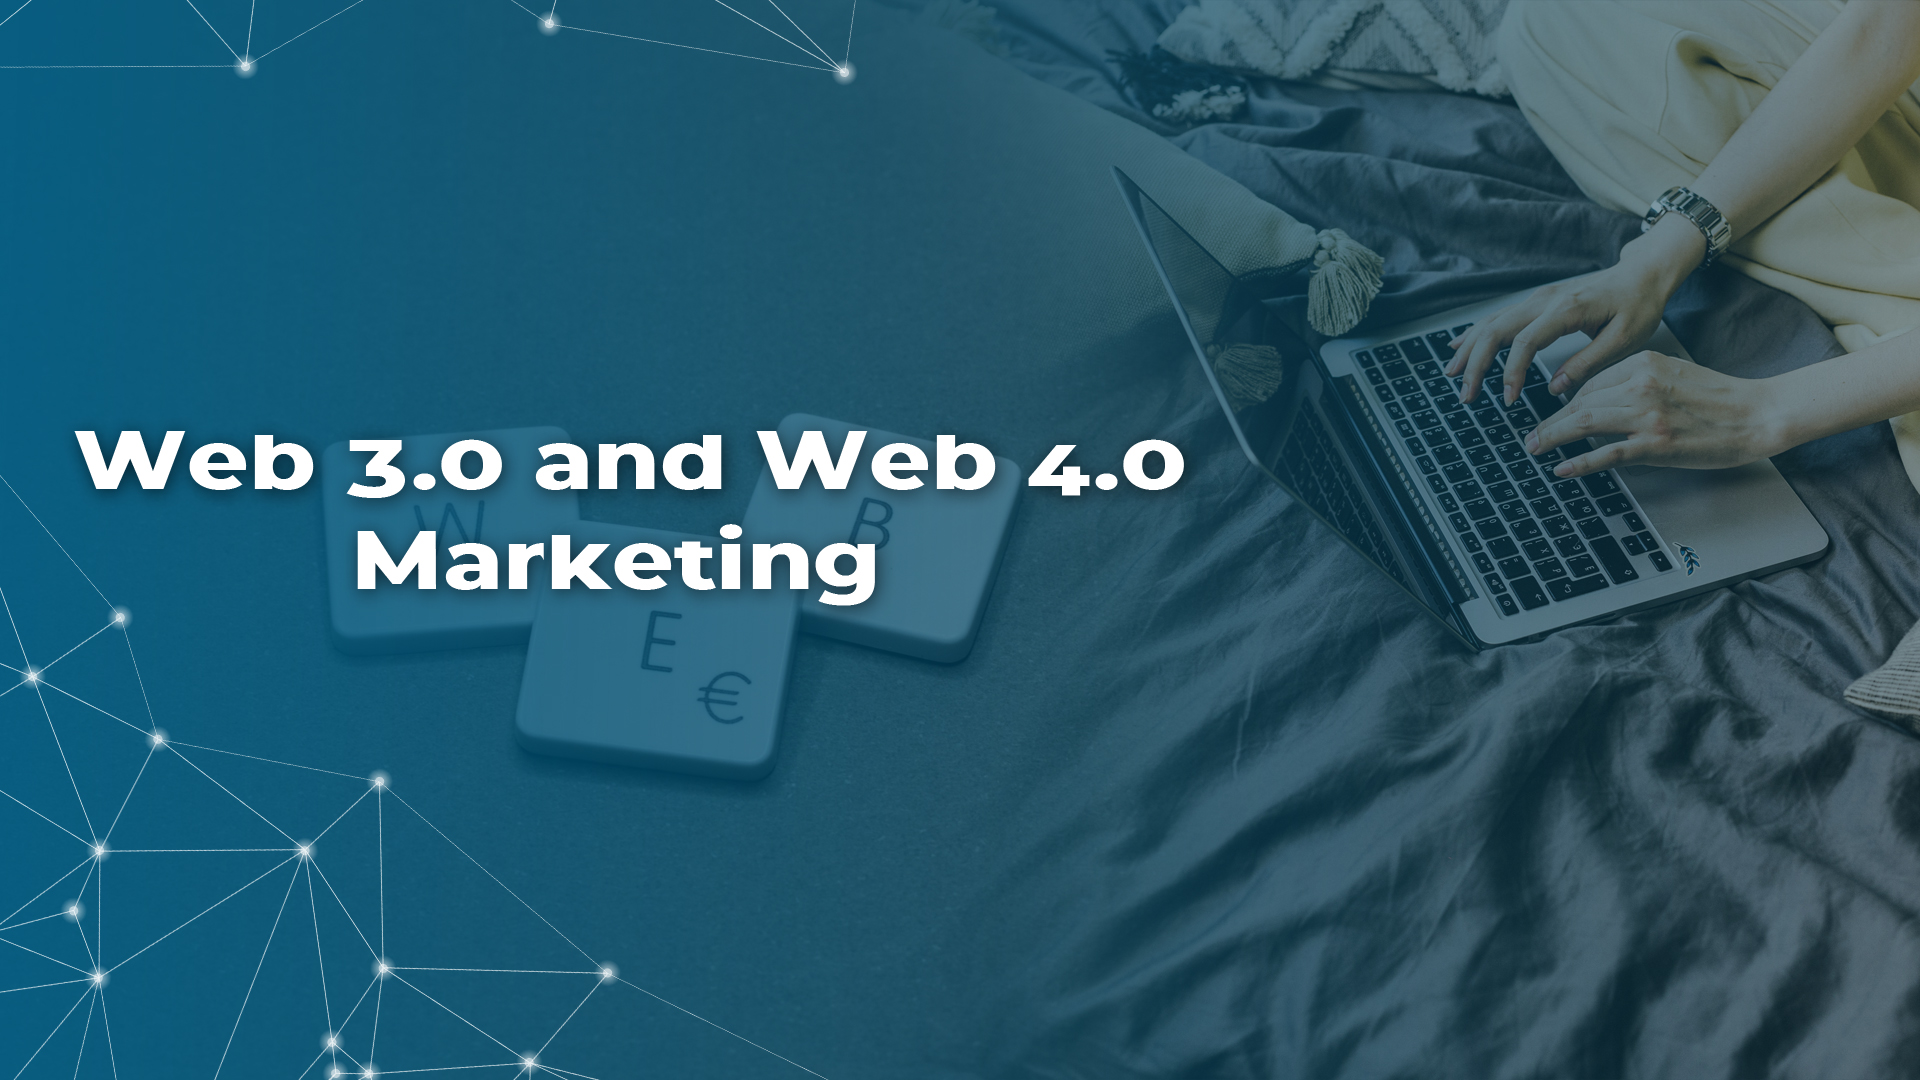 New-Age Internet: Are you ready for Web 3.0 and Web 4.0 Marketing?